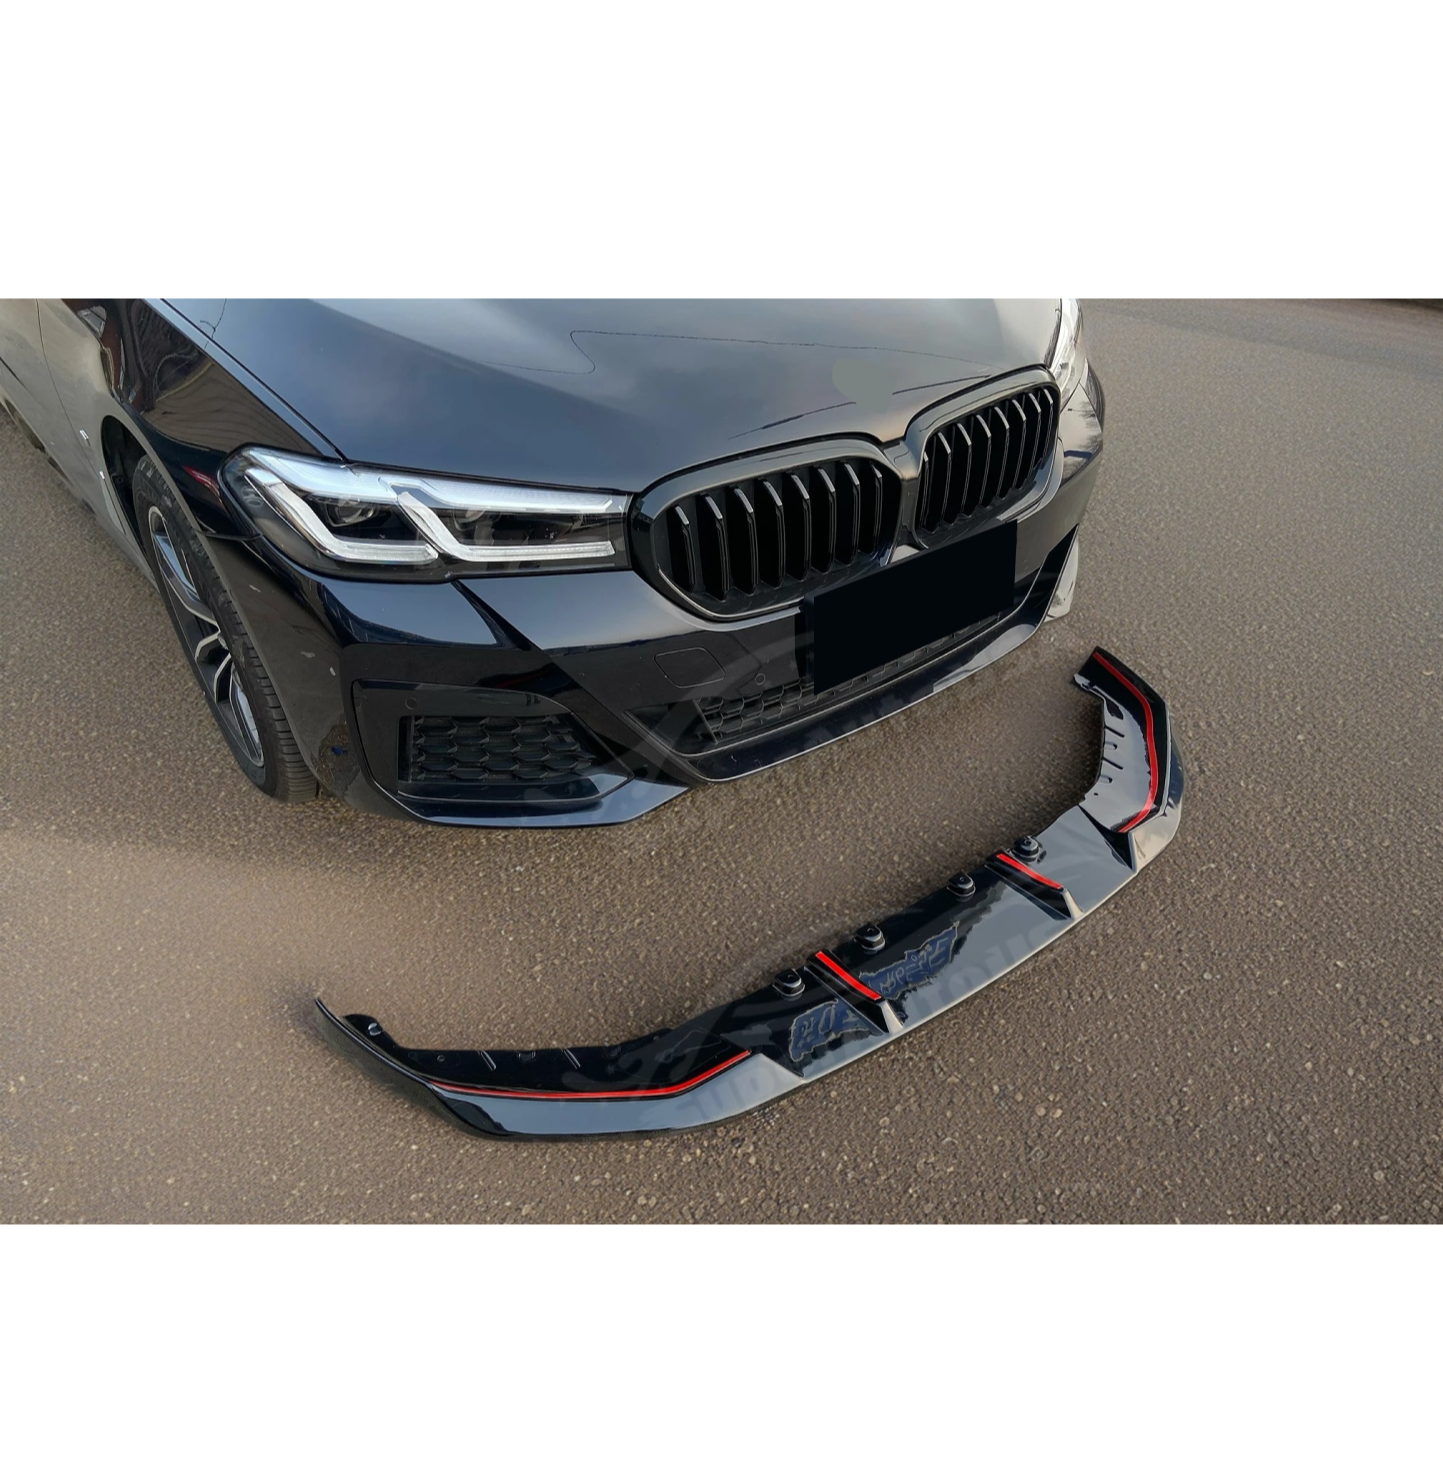 Front-end display of the Fit 2021-2024 BMW 5 Series G30 with the Gloss Black Front Bumper Lip Spoiler, highlighting the vehicle's enhanced profile.